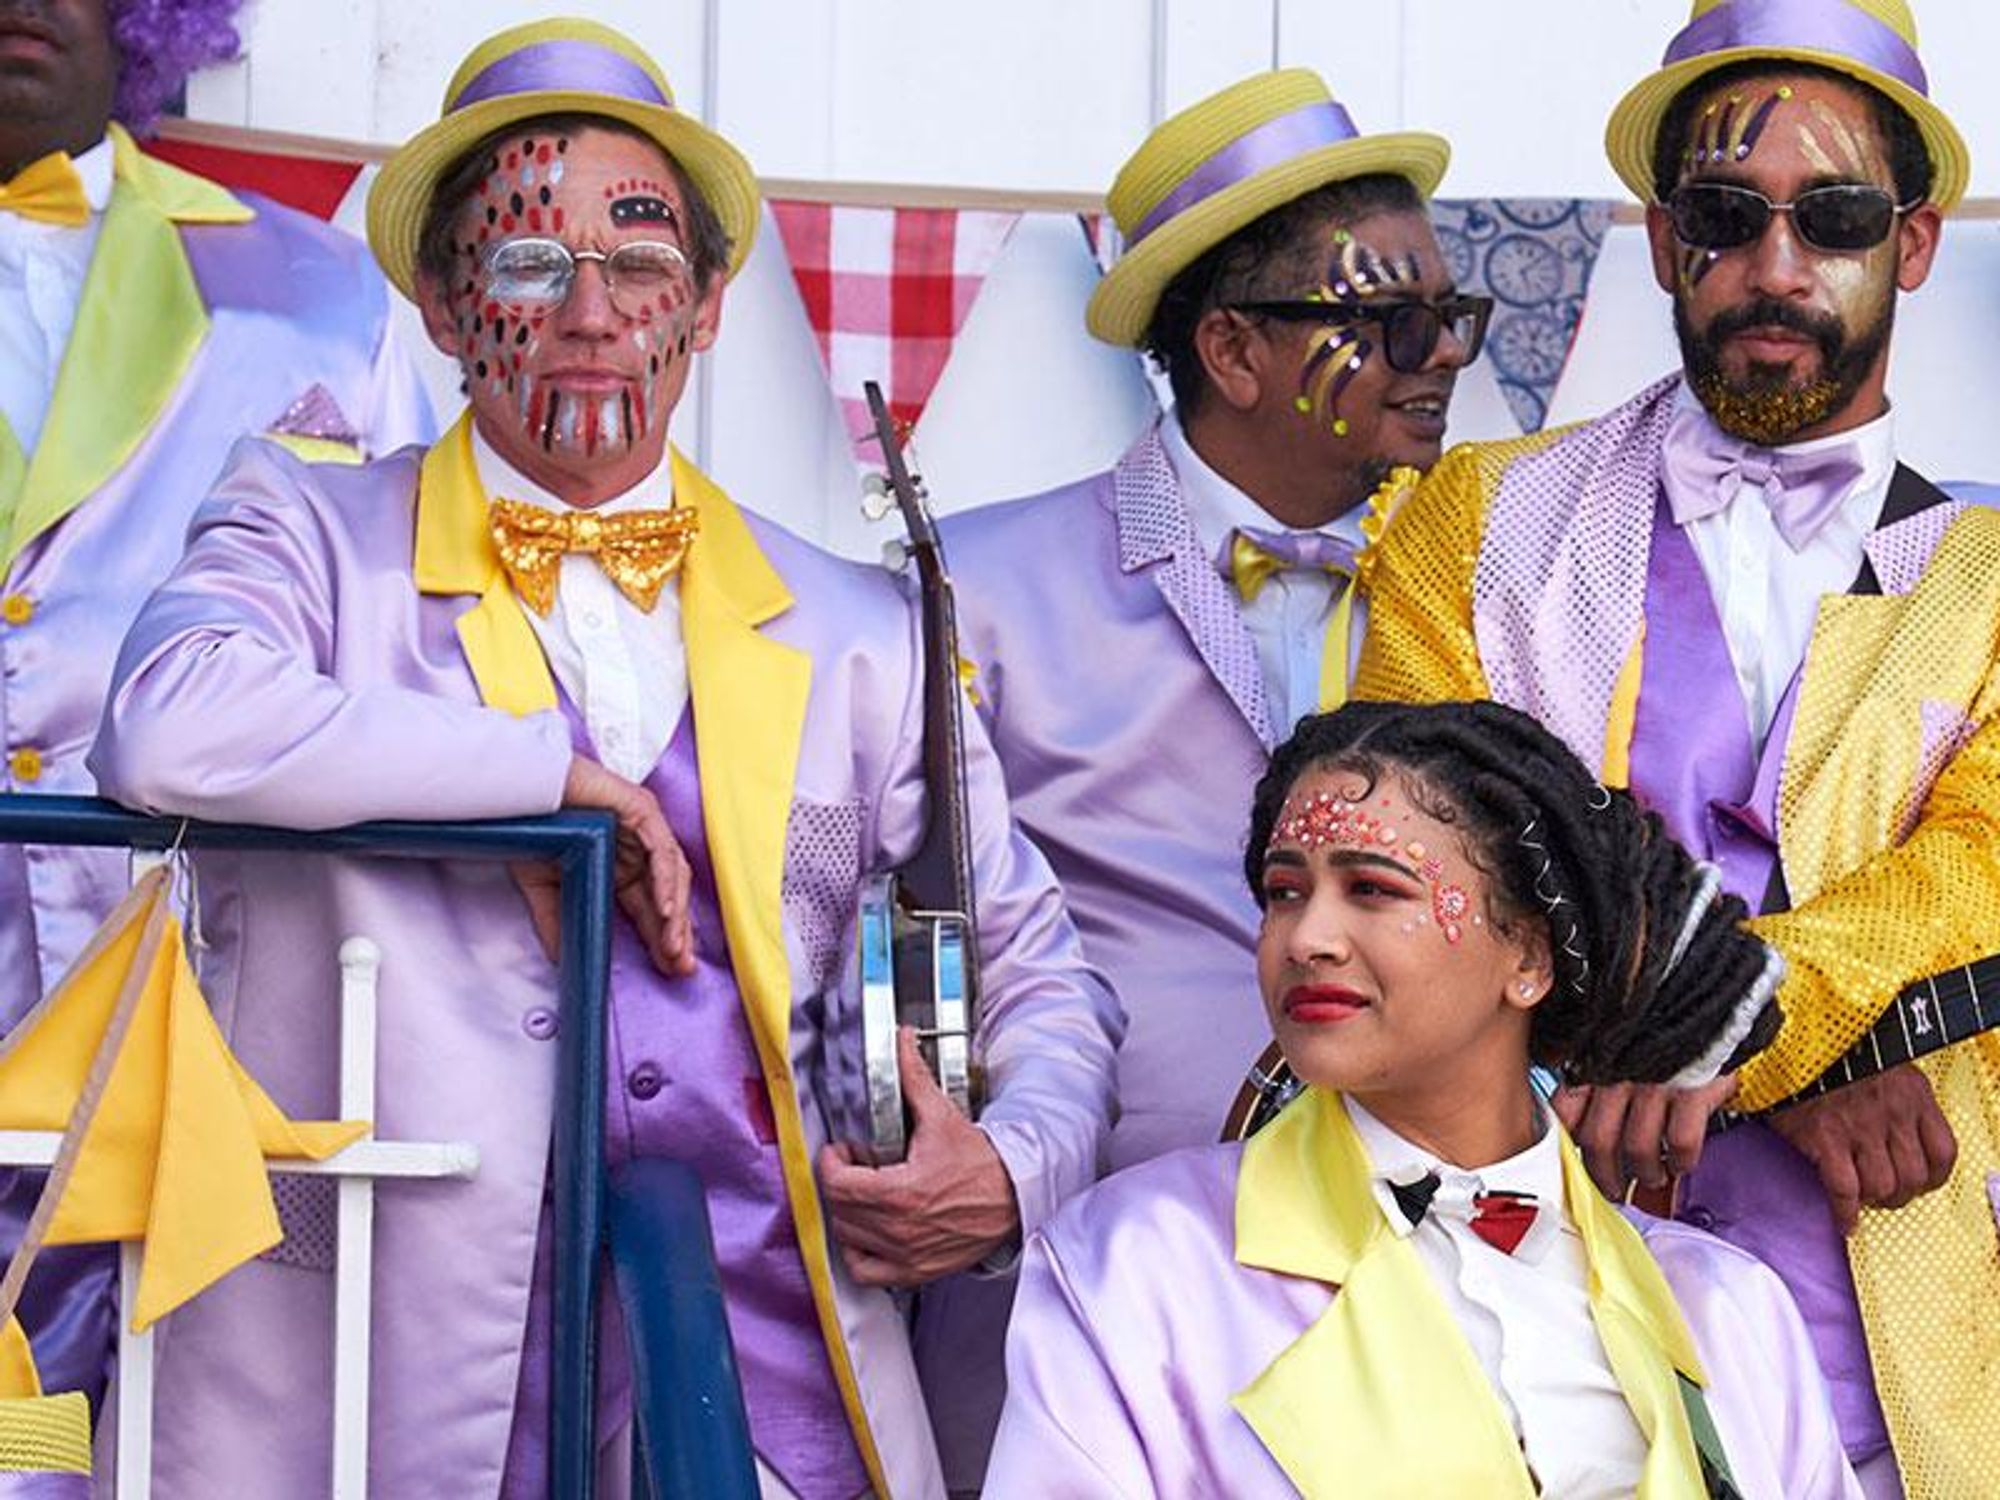 A still image from the film The Umbrella Men of minstrels in colorful outfits, waiting to play their instruments